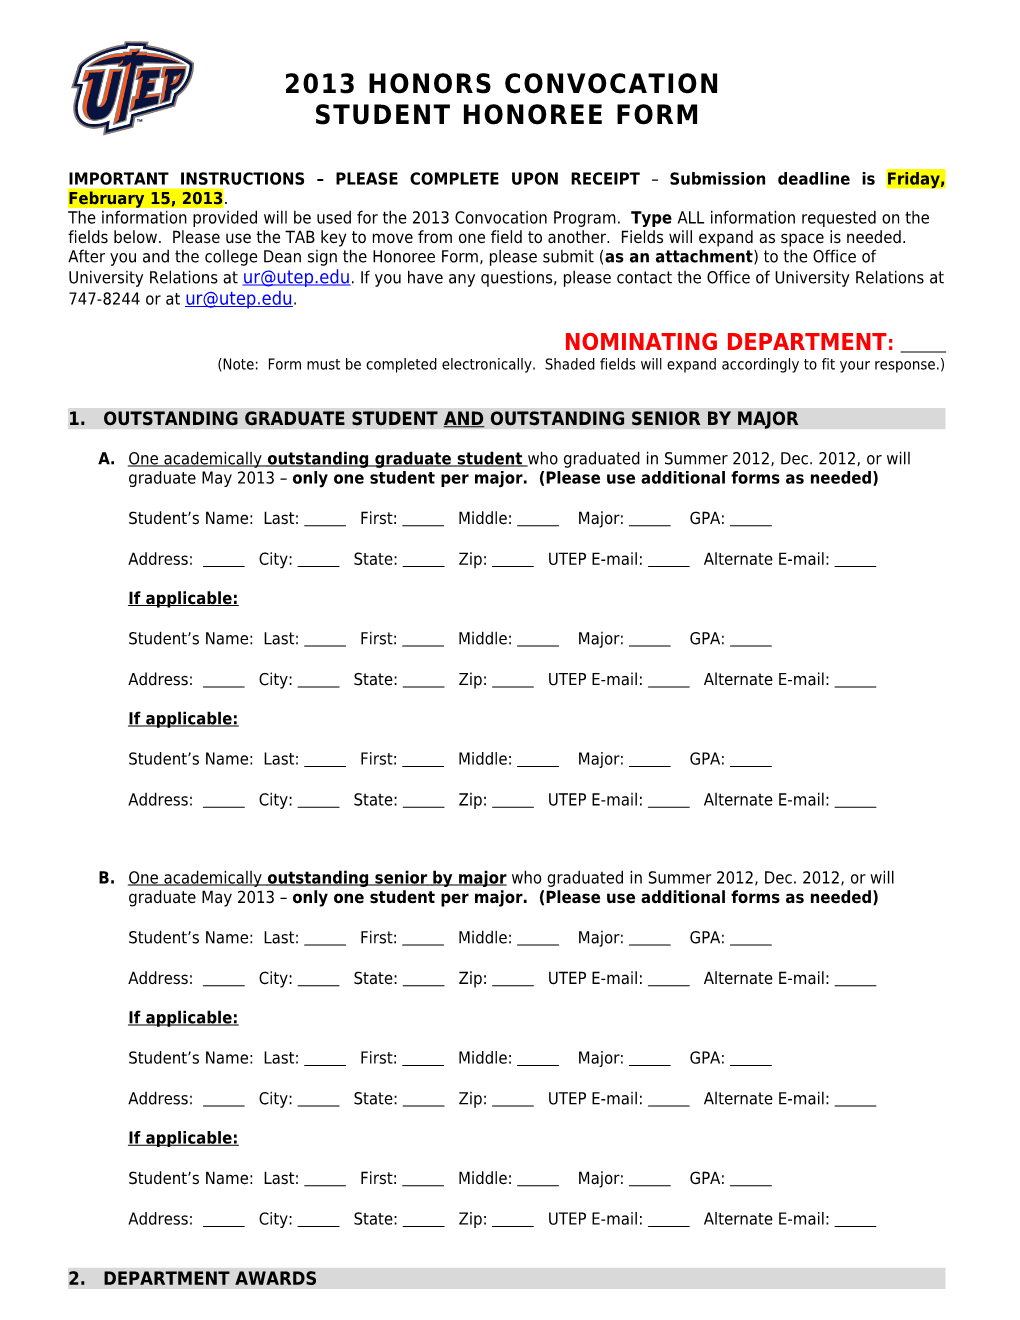 Student Honoree Form